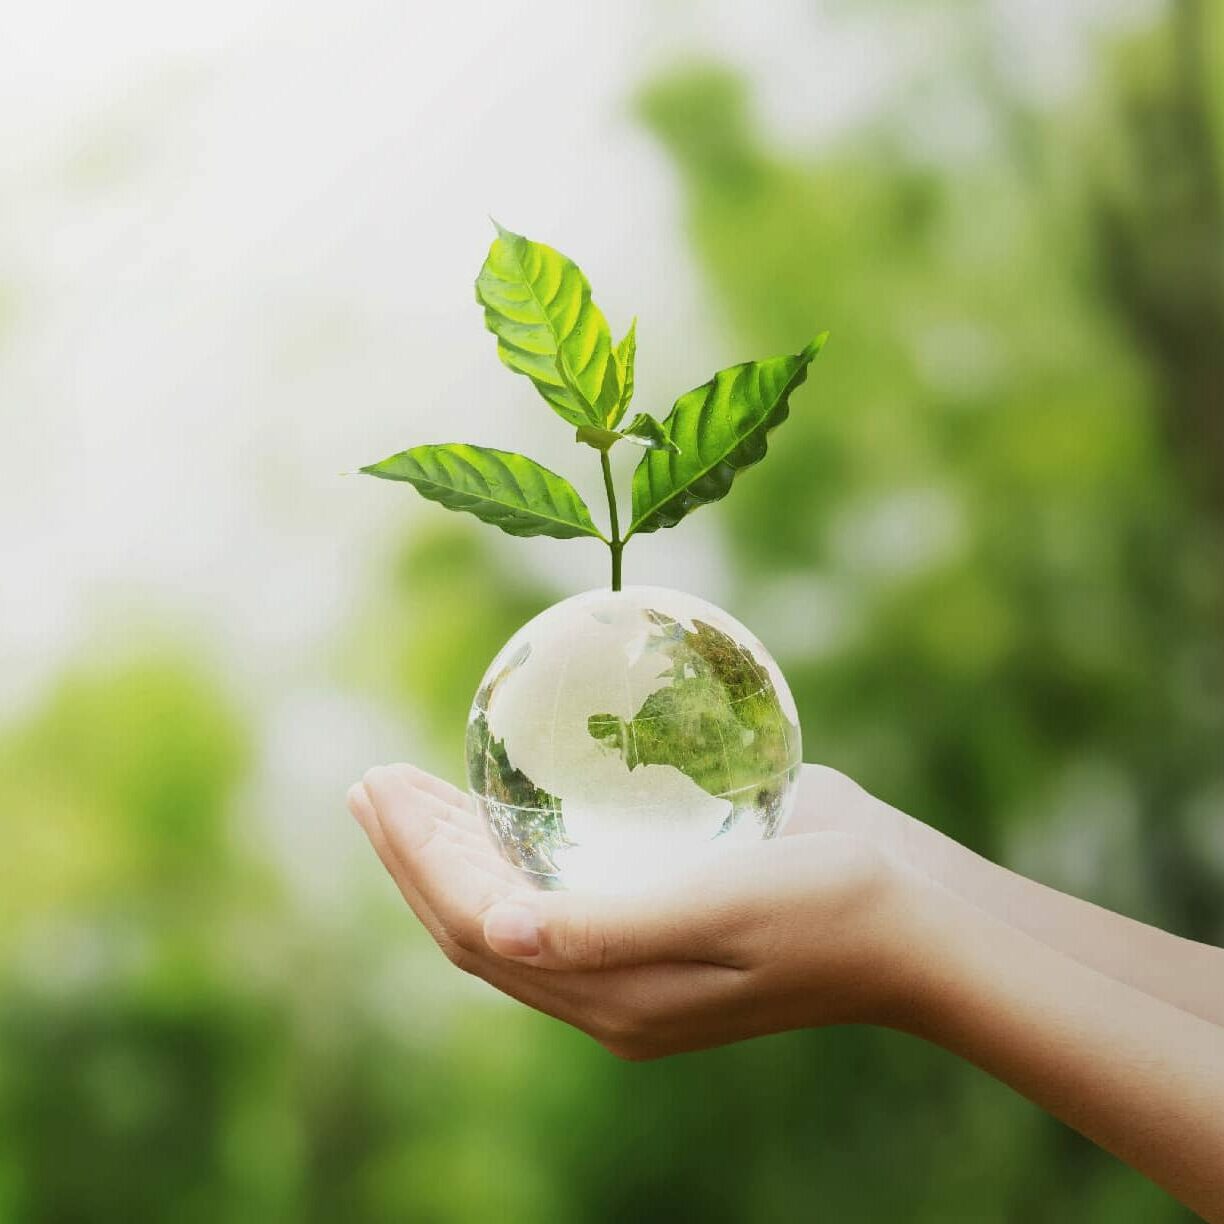 hand holding glass globe ball with tree growing and green nature blur background. eco concept